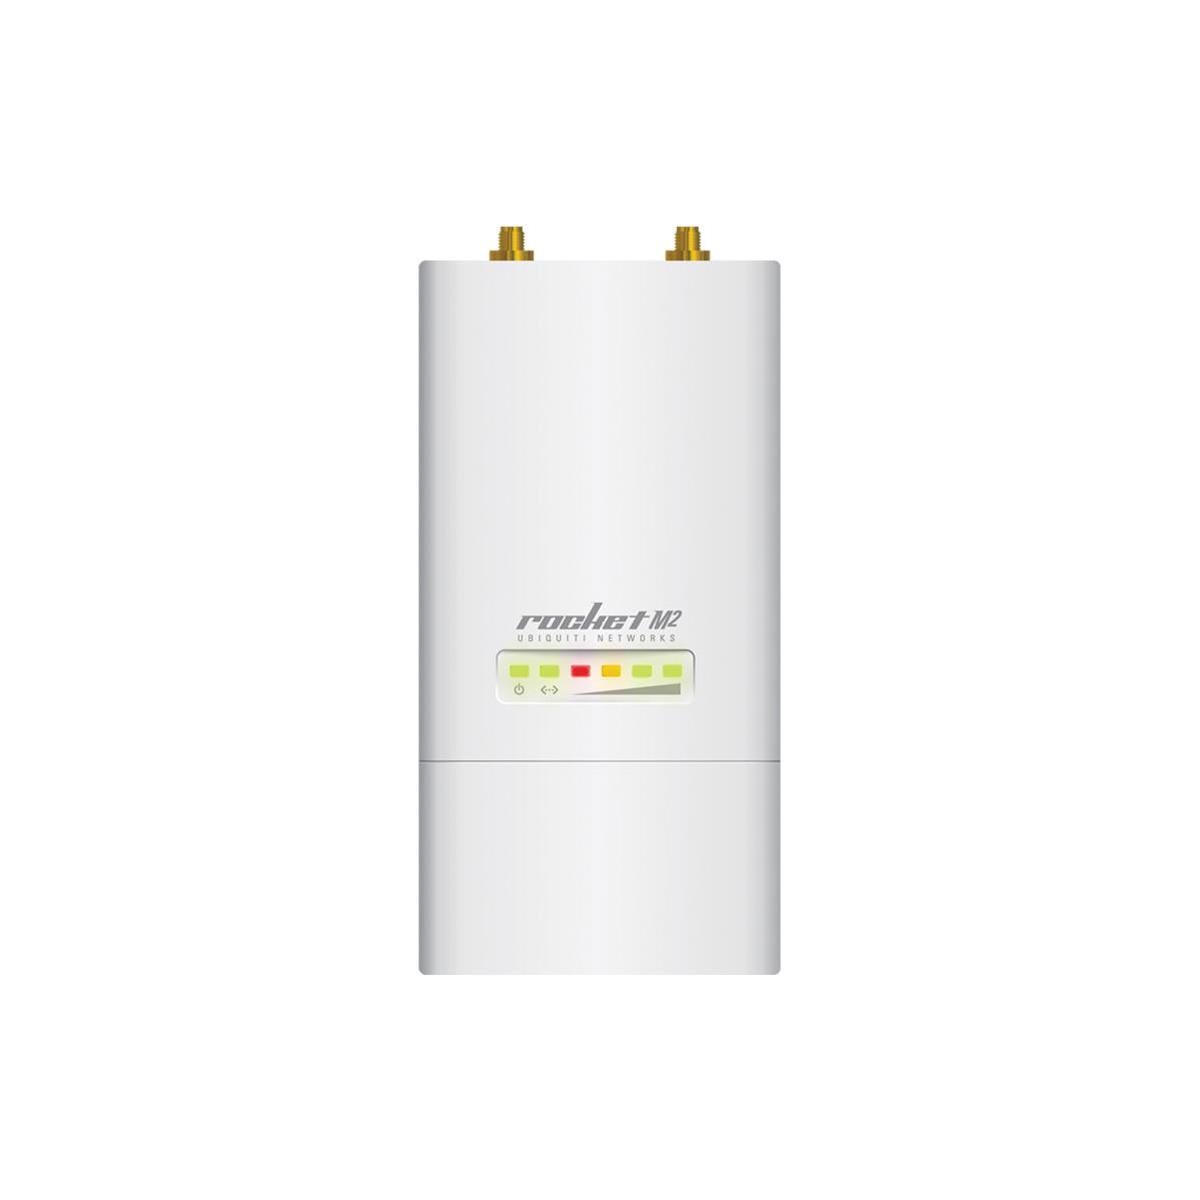 Image of Ubiquiti Networks RocketM2 2.4GHz 2x2 MIMO airMAX BaseStation